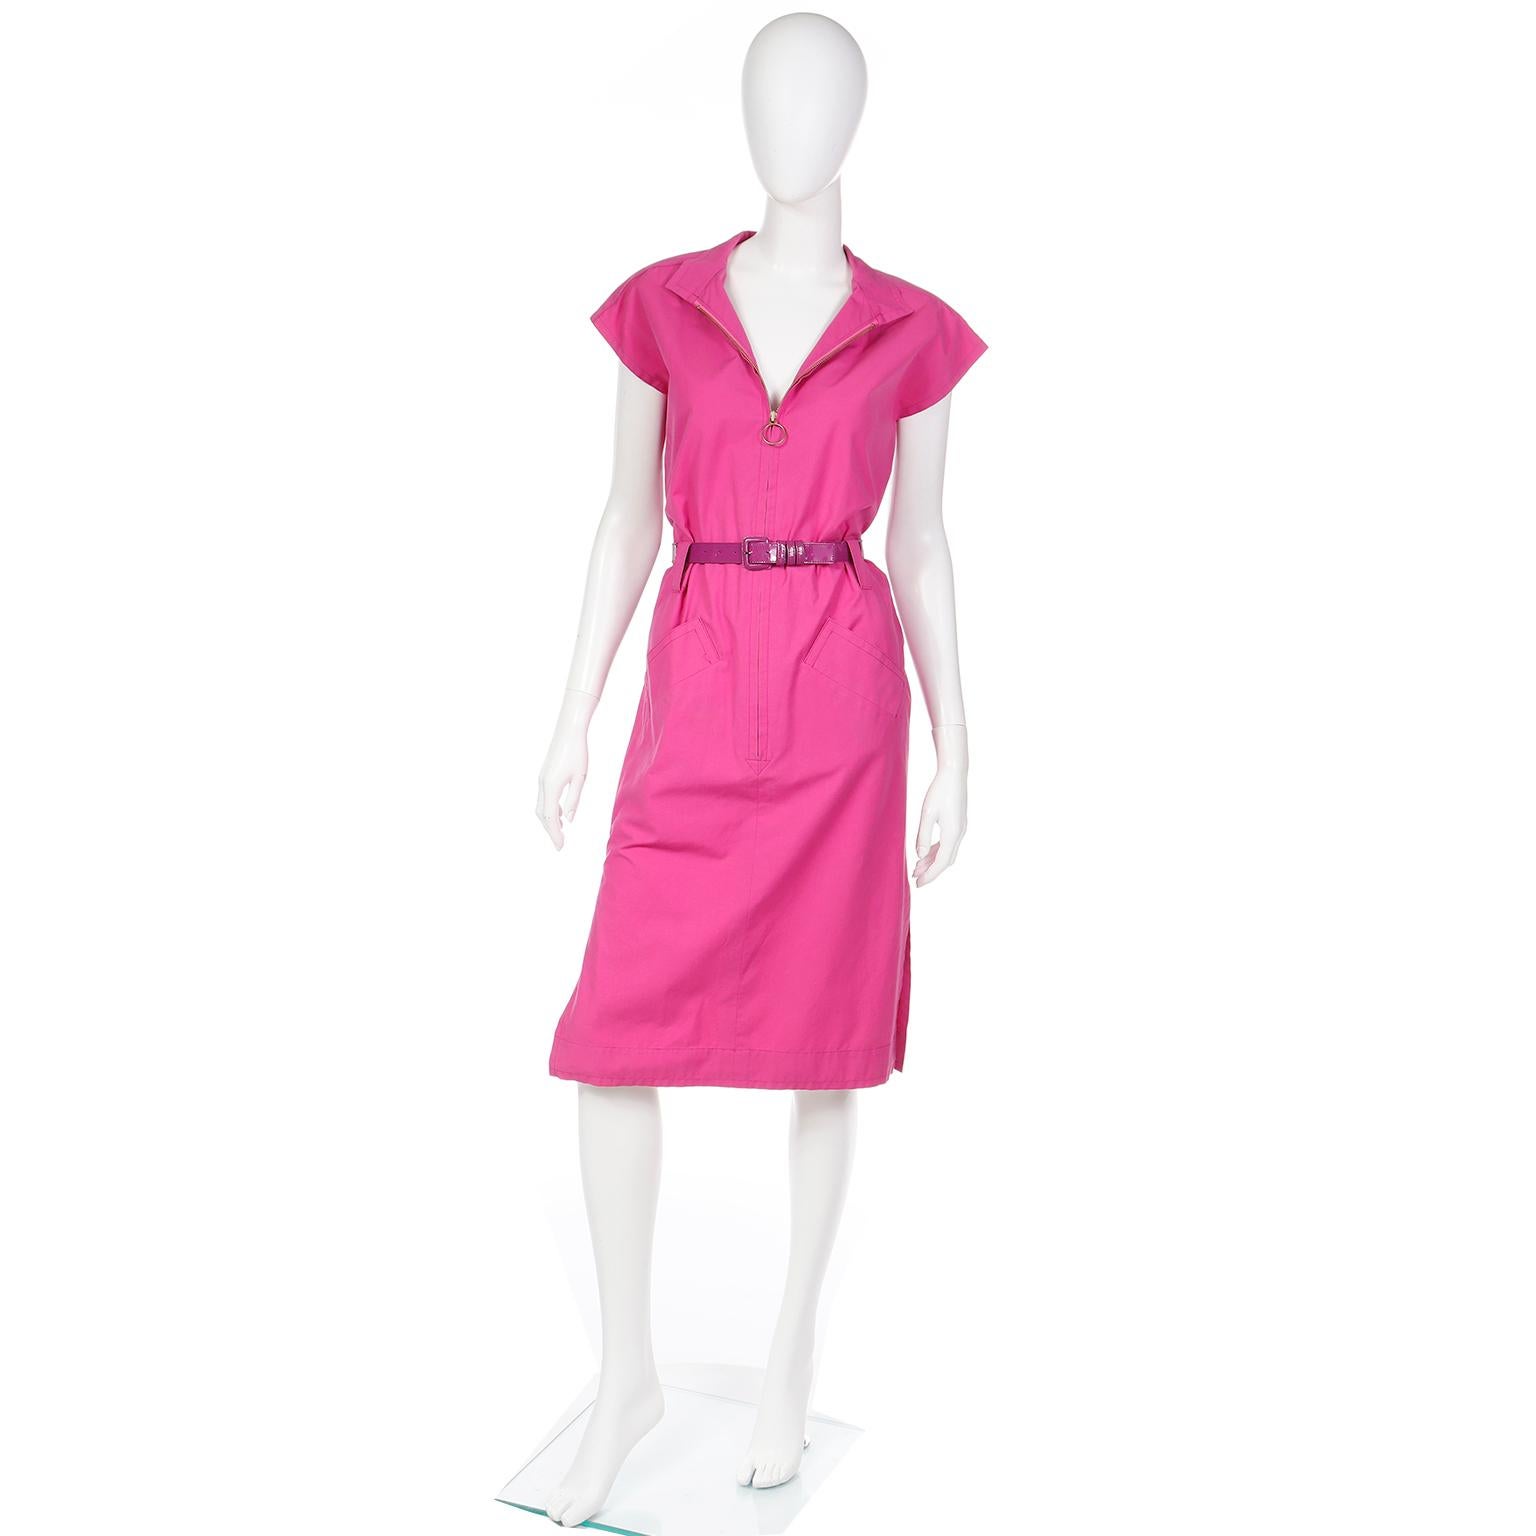 This lovely vintage early 1980s Yves Saint Laurent dress is in a pretty pink cotton. The dress has 2 front patch pockets, a mandarin collar, cap sleeves, and slits in the skirt with a front zip closure with a loop pull. This dress comes with both a